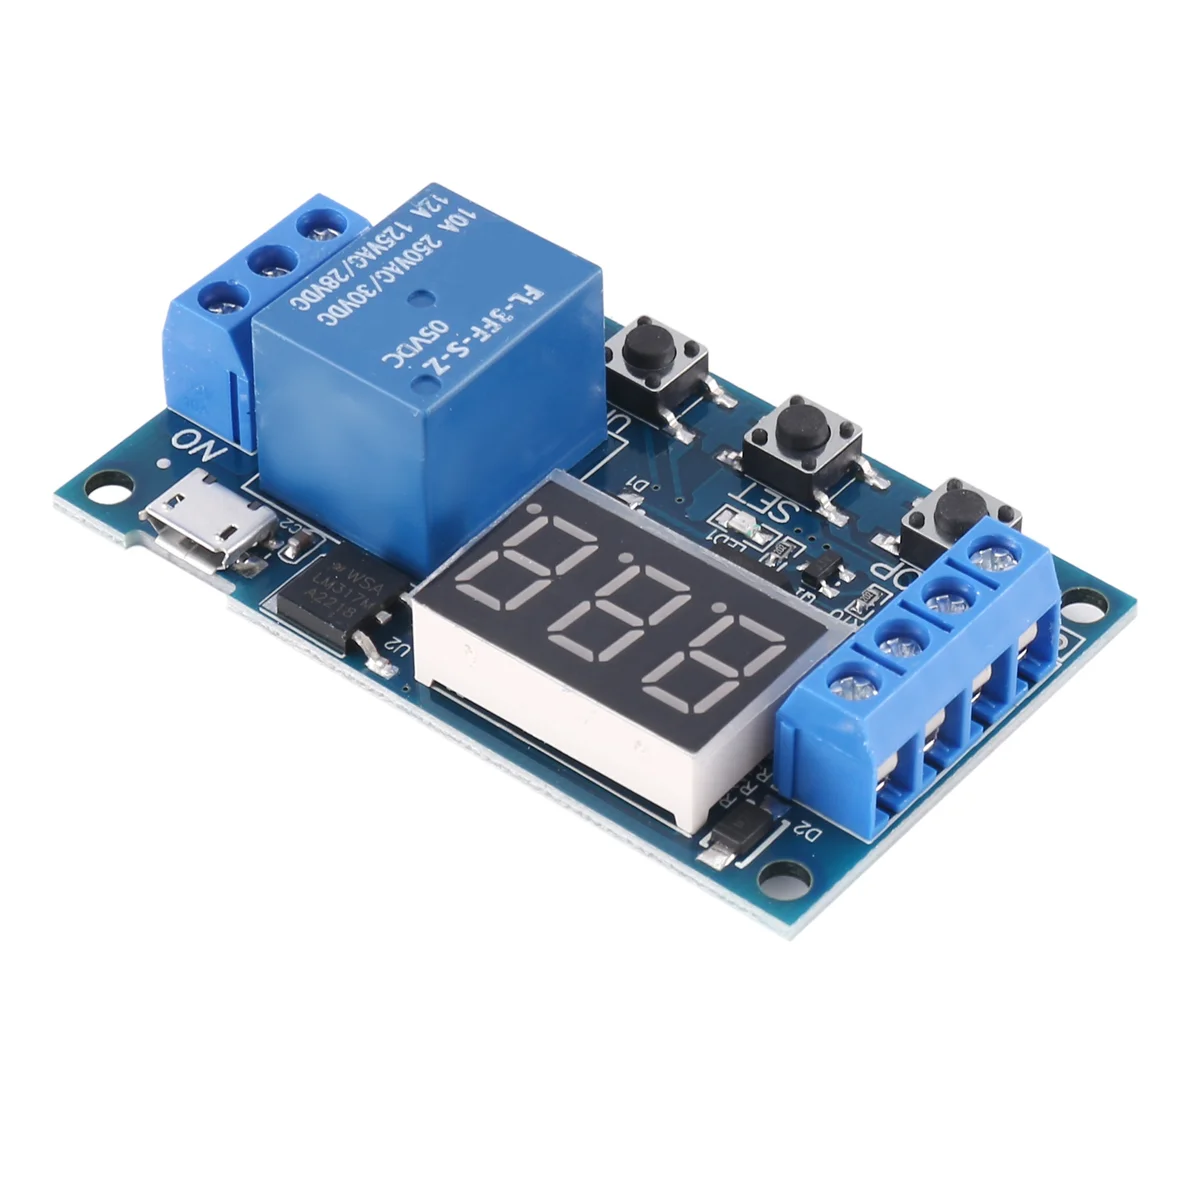 

HW-521 Digital Time Delay 1 Way Relay Trigger Cycle Timer Delay Switch Circuit Board Timing Control Module